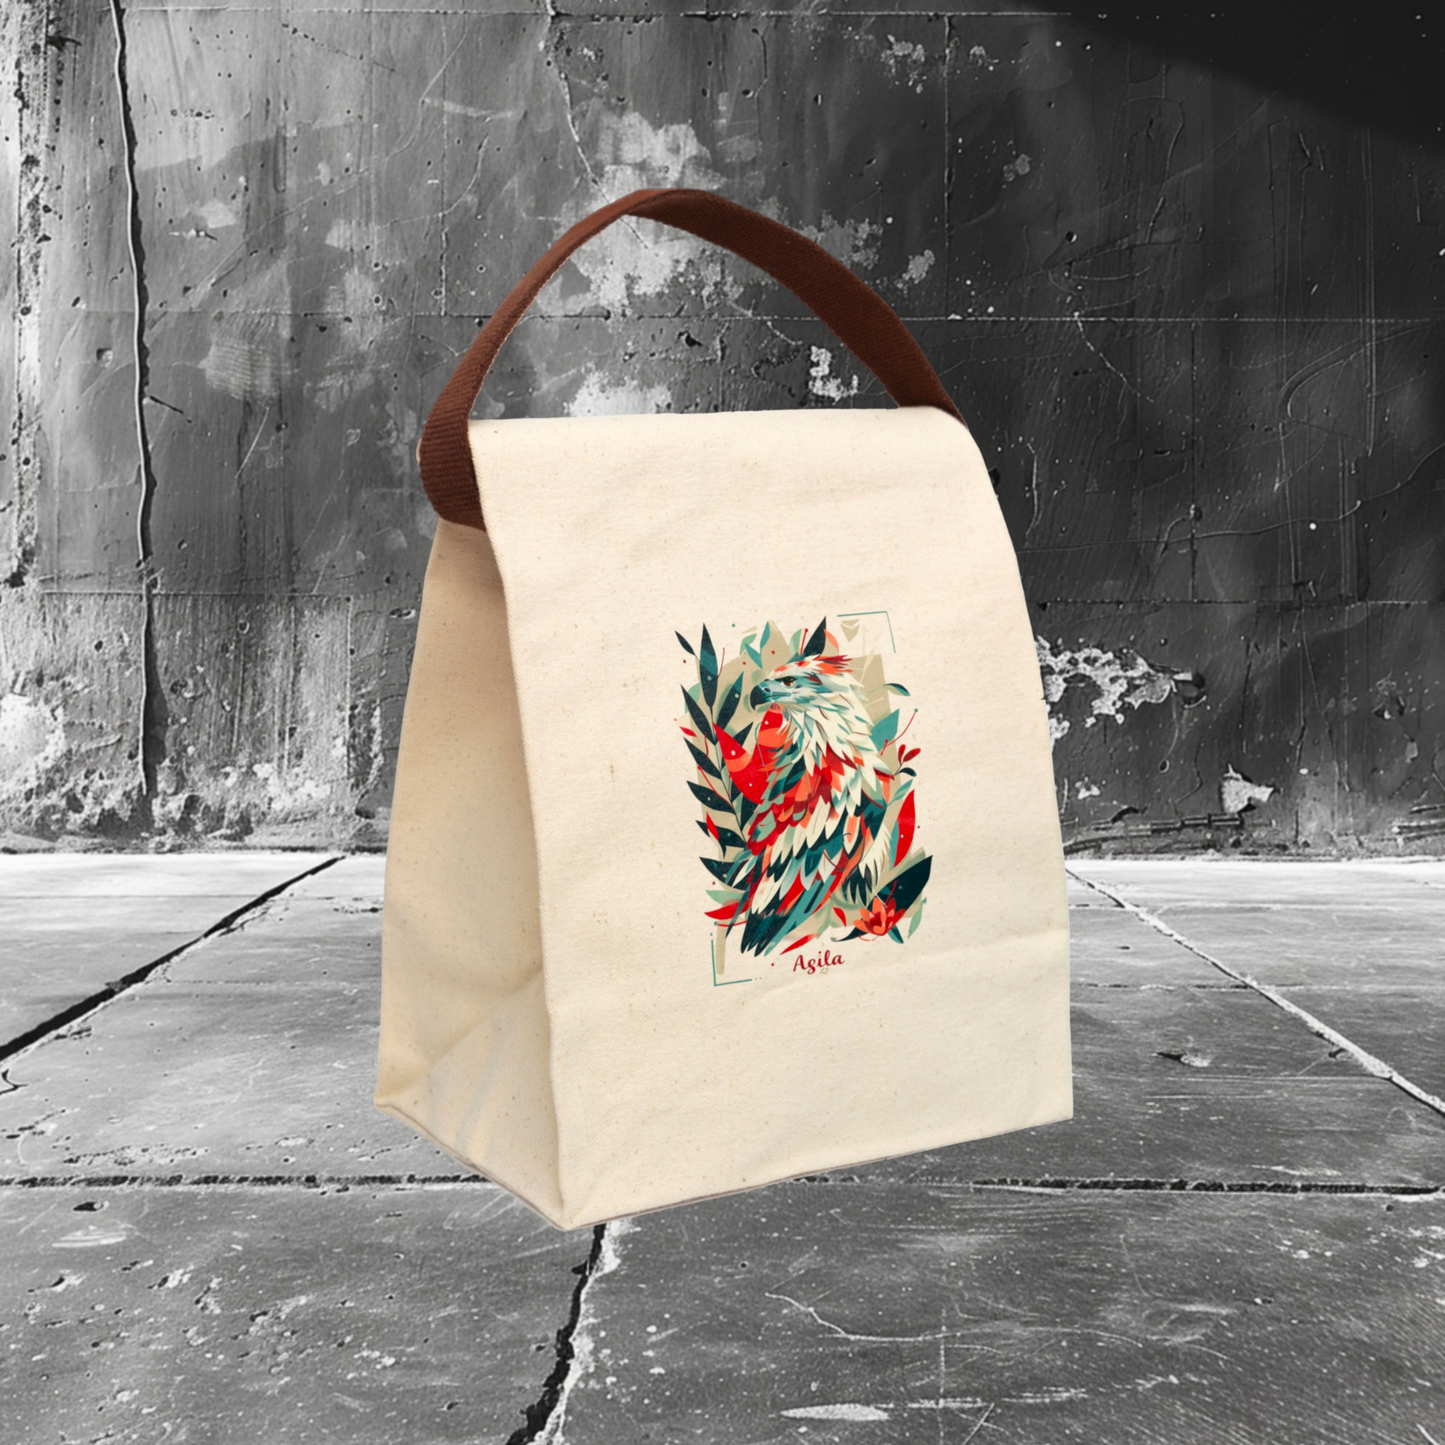 Agila Canvas Lunch Bag With Strap